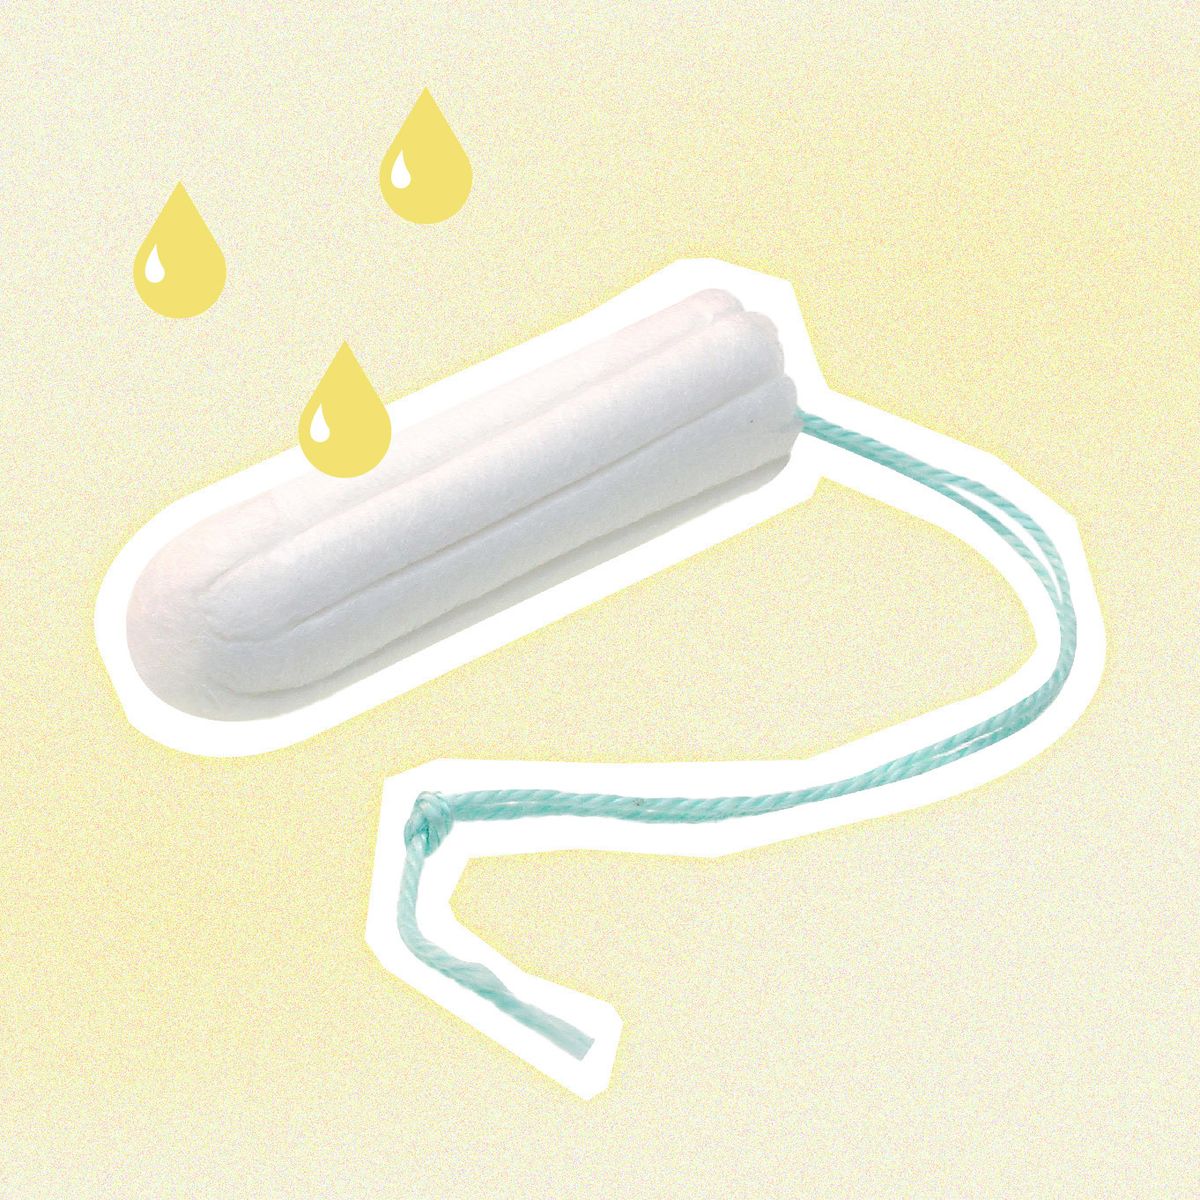 How to Pee Tampon In - Can you Pee With a Tampon In?